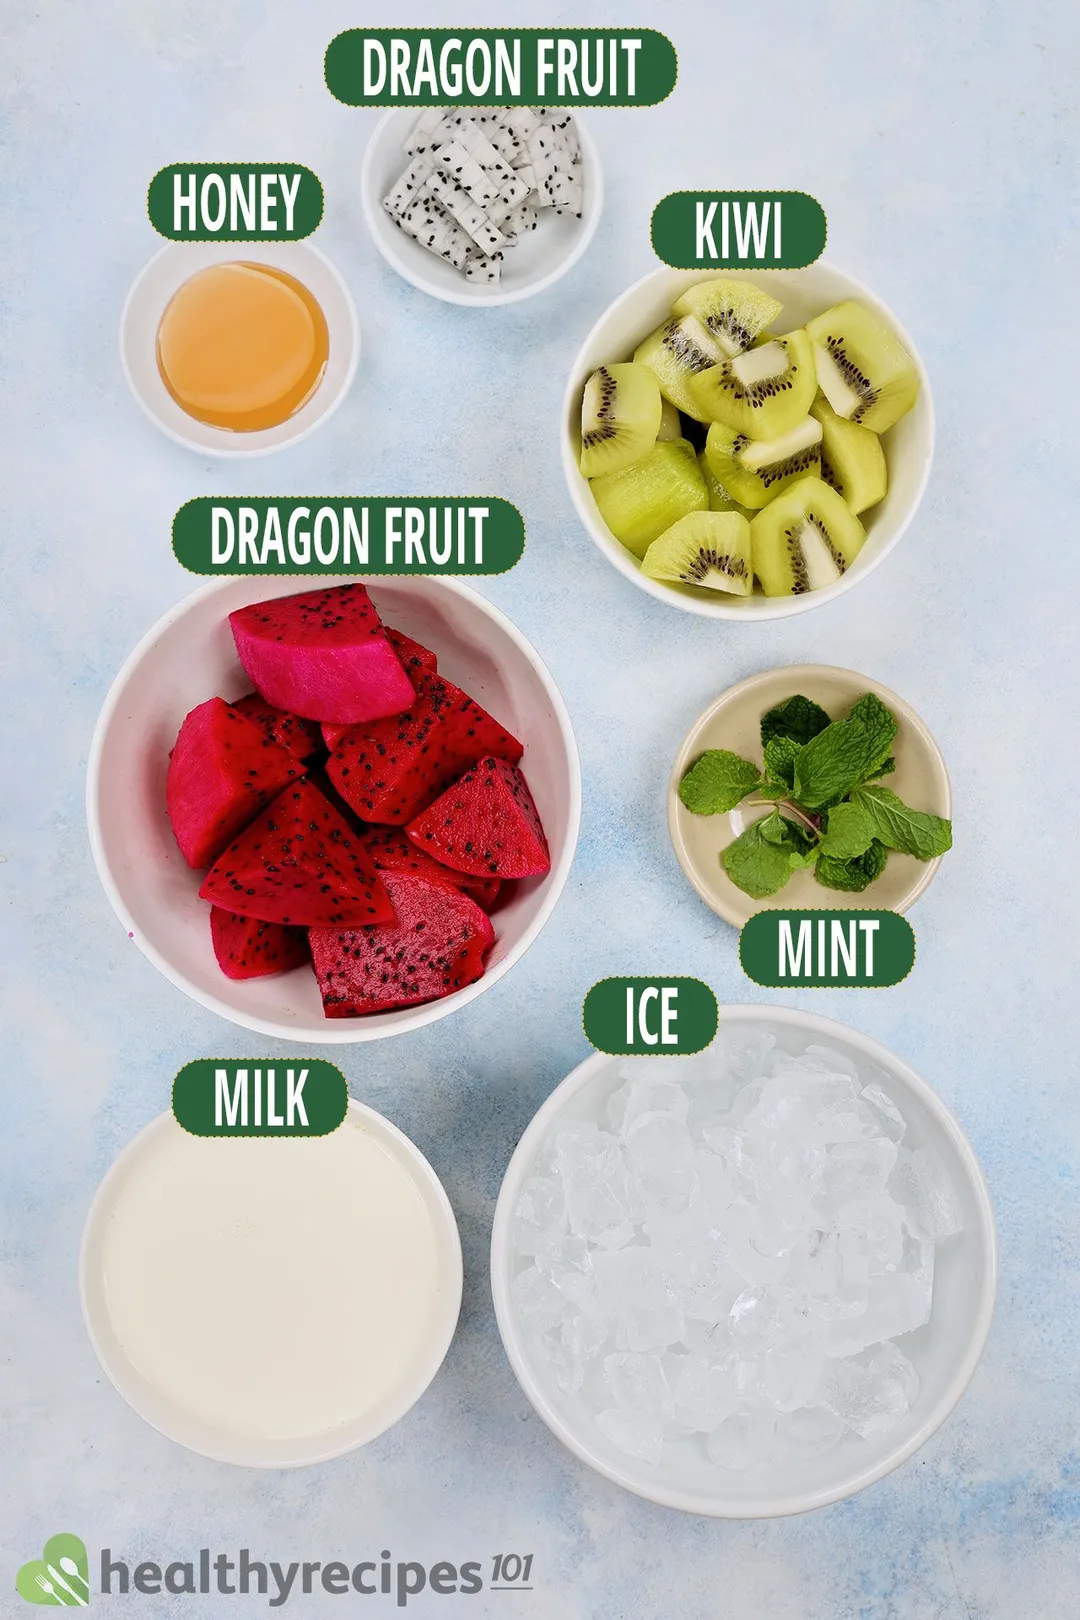 Ingredients for Dragon Fruit Smoothie, including bowls of red dragon fruit, sliced green kiwi, white dragon fruit, and other smoothie essentials.